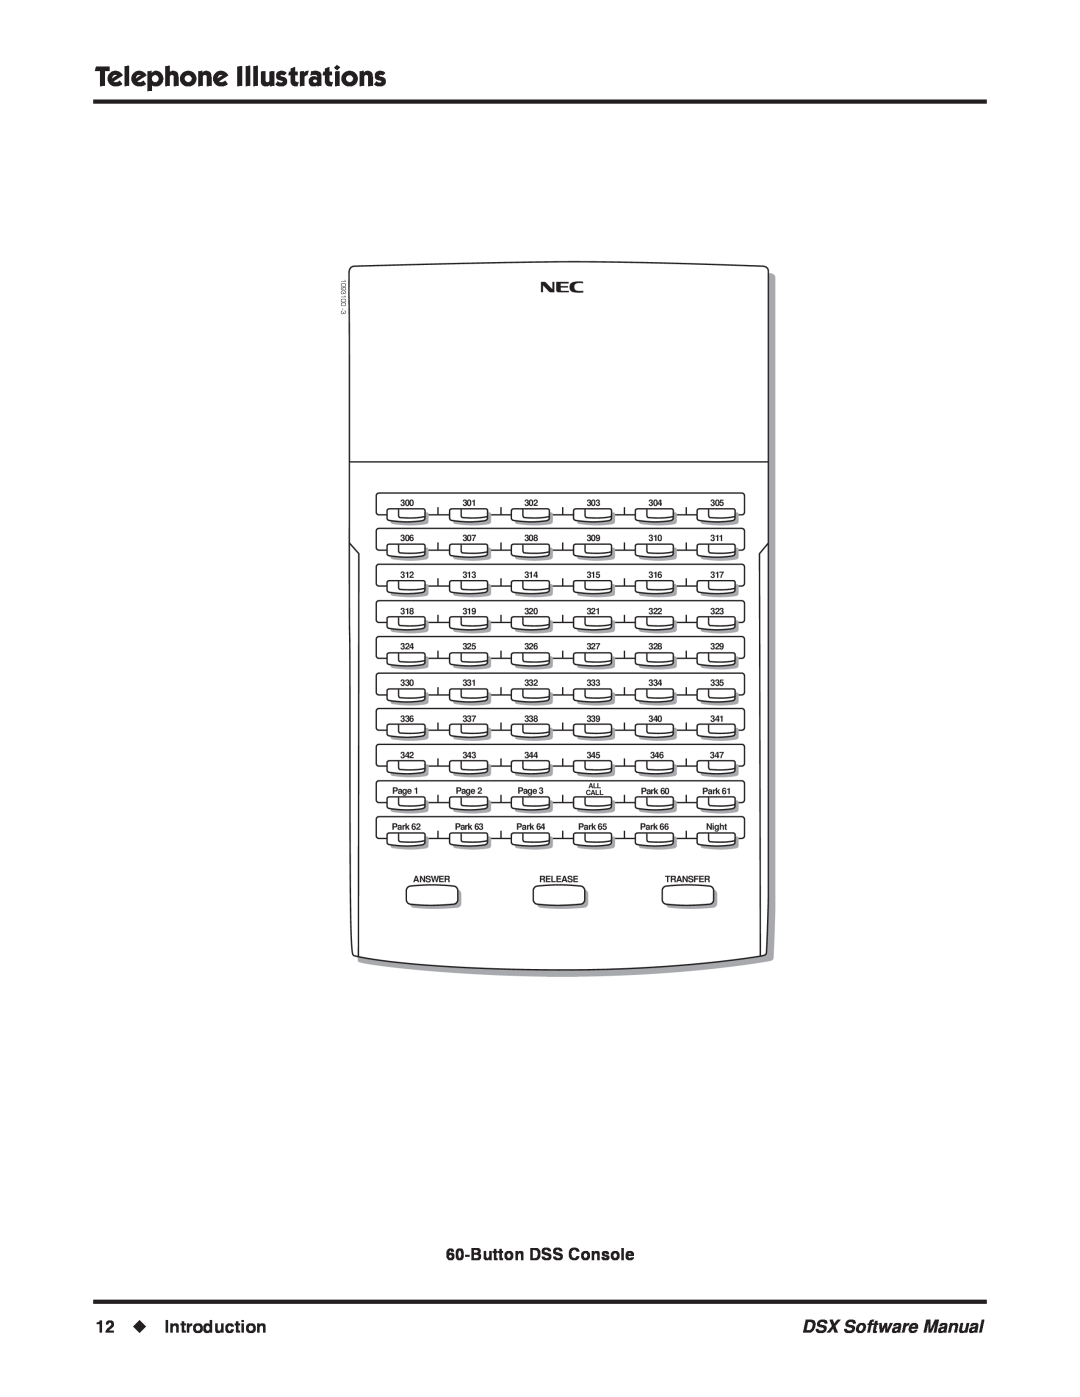 NEC N 1093100 Telephone Illustrations, ButtonDSS Console, Introduction, DSX Software Manual, Page, Park, Answer, Transfer 